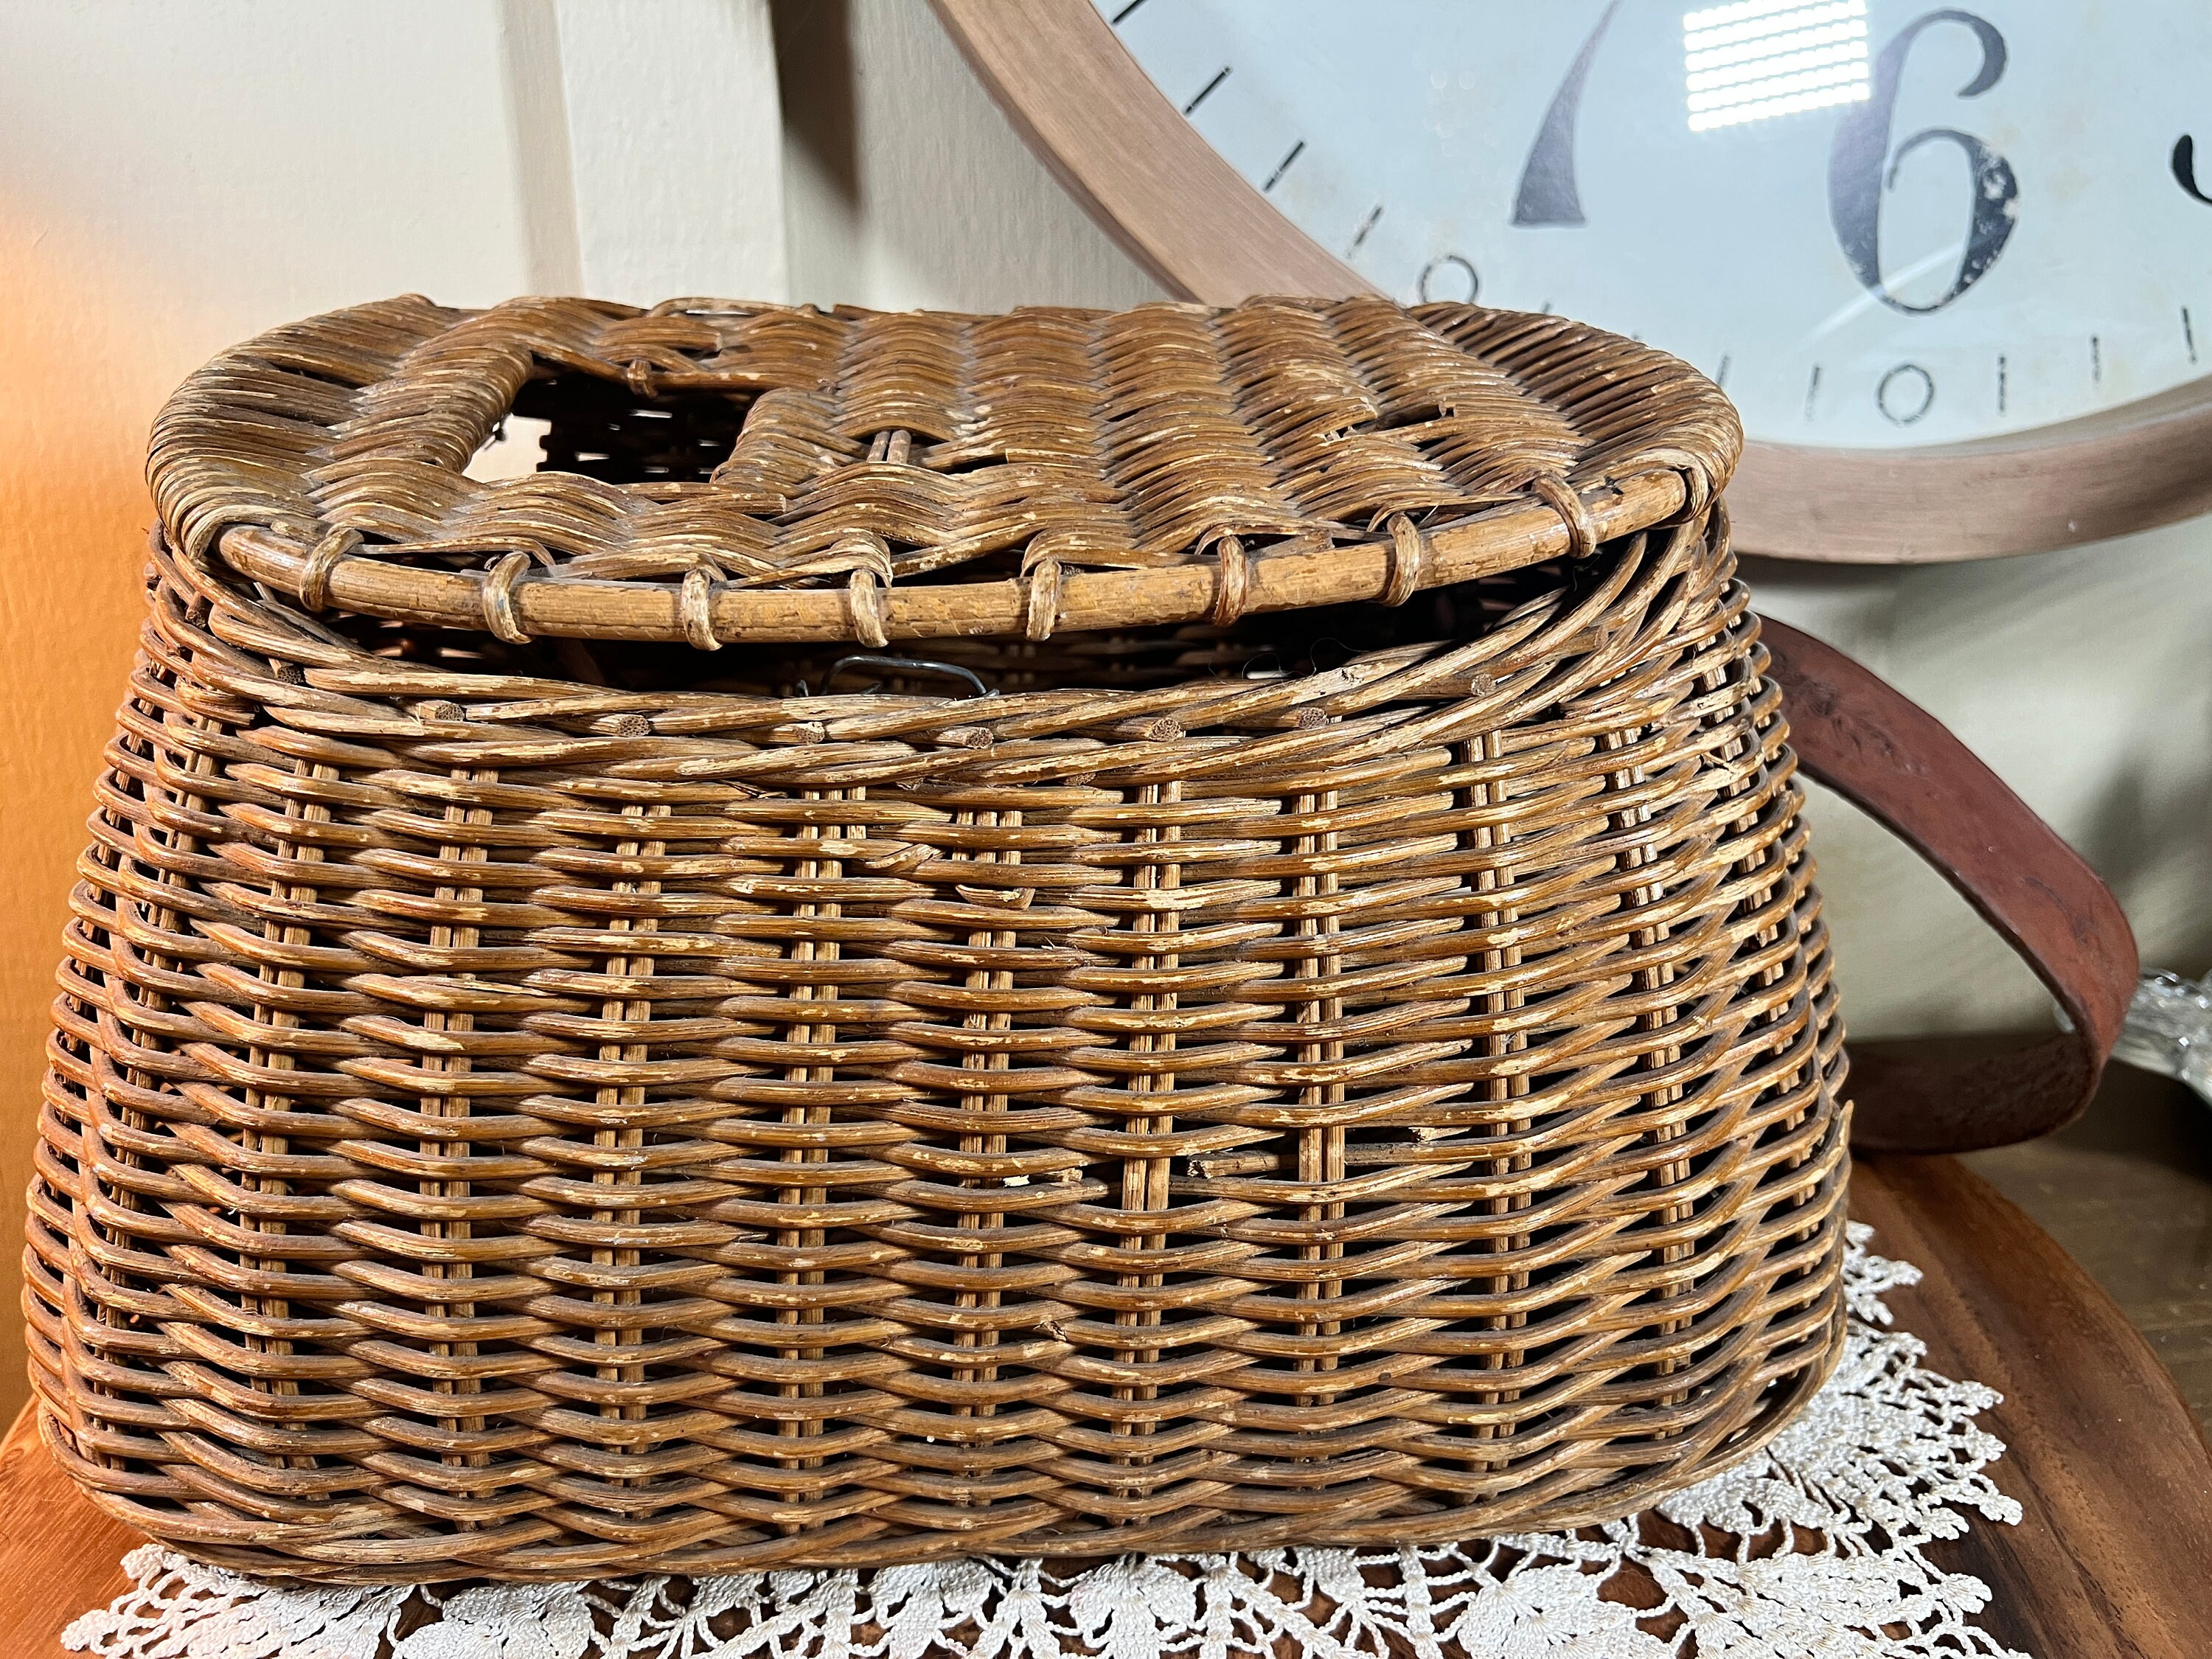 Antique, Vintage, Wicker, Fly Fishing, Trout, Fish, Creel, Basket